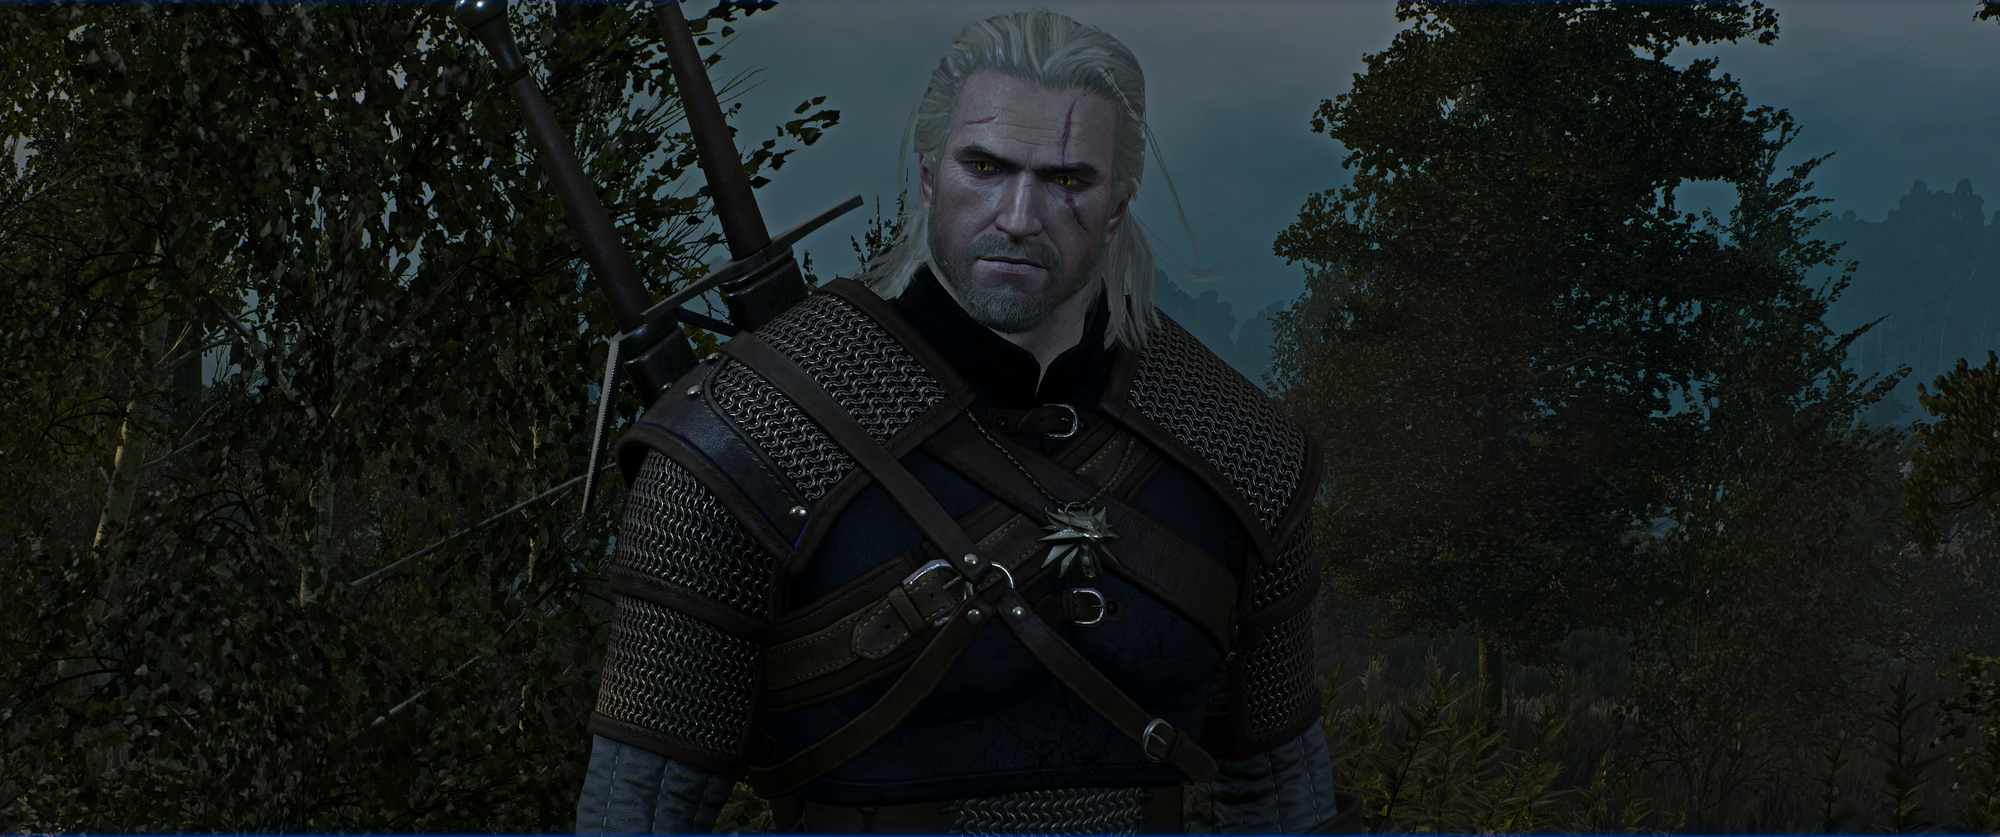 The Witcher 3 Screenshot 2019.01.02 - 20.04.33.48.png